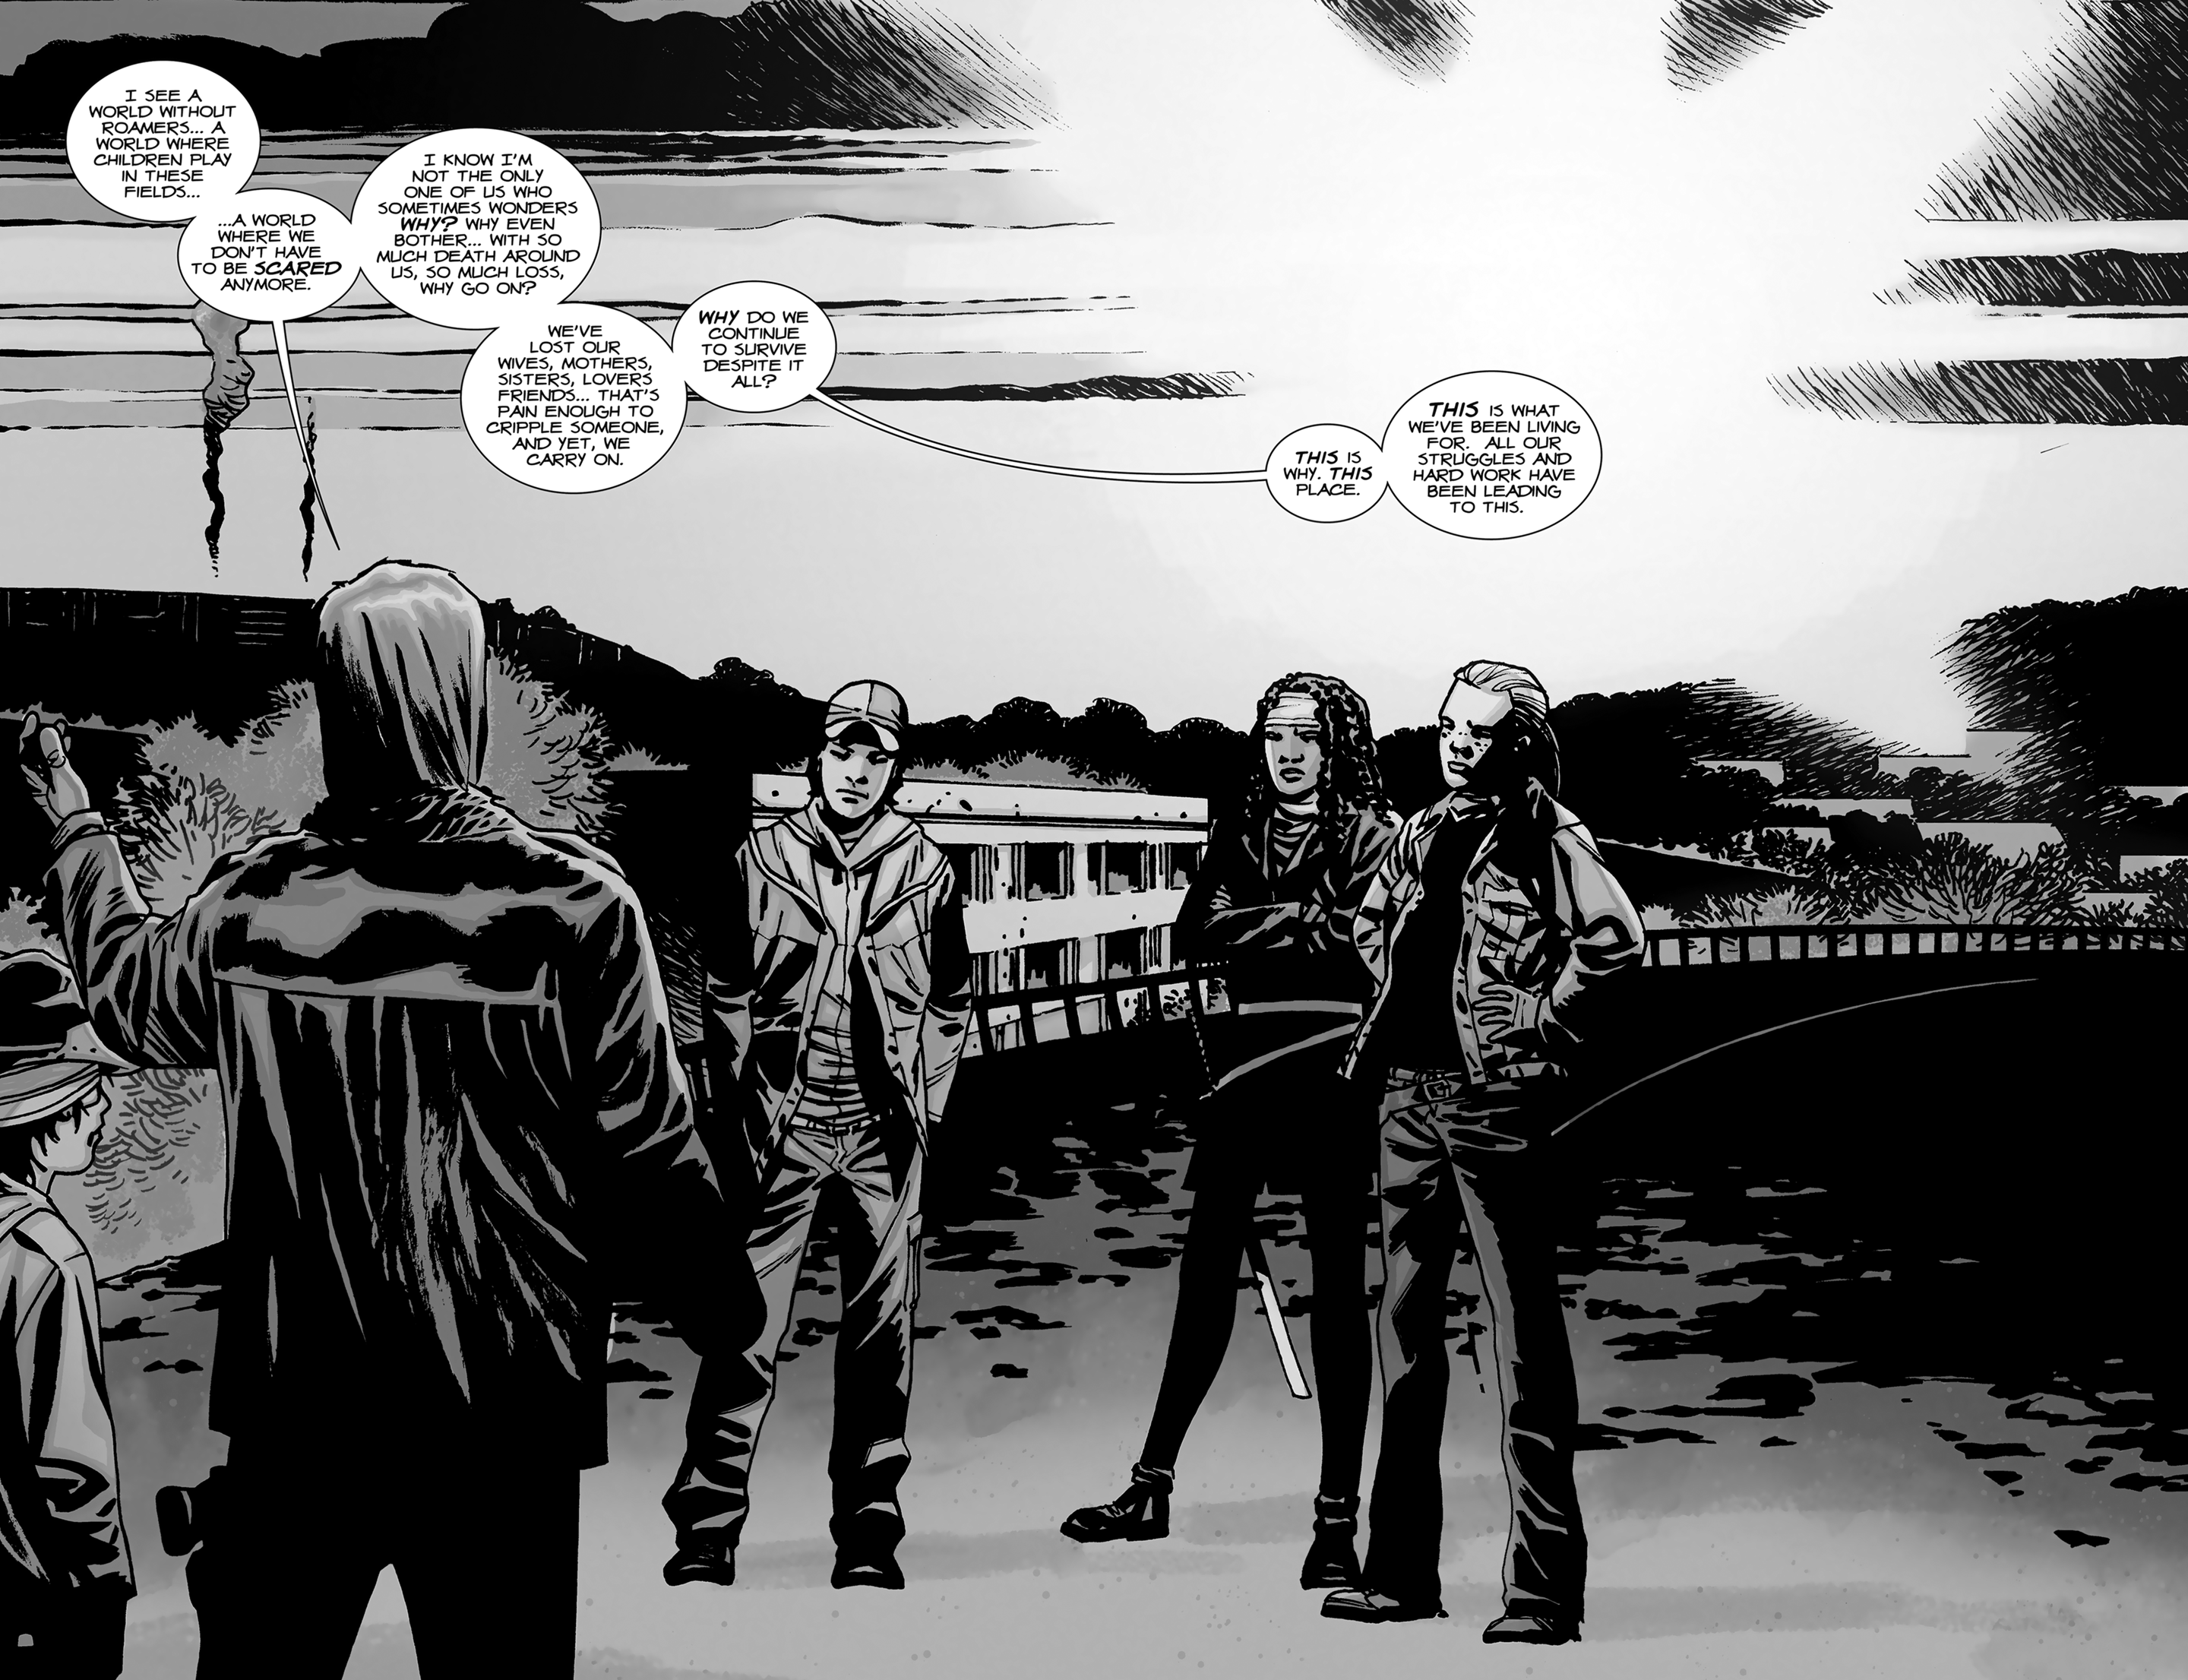 THE WALKING DEAD 96 - A LARGER WORLD, CONCLUSION